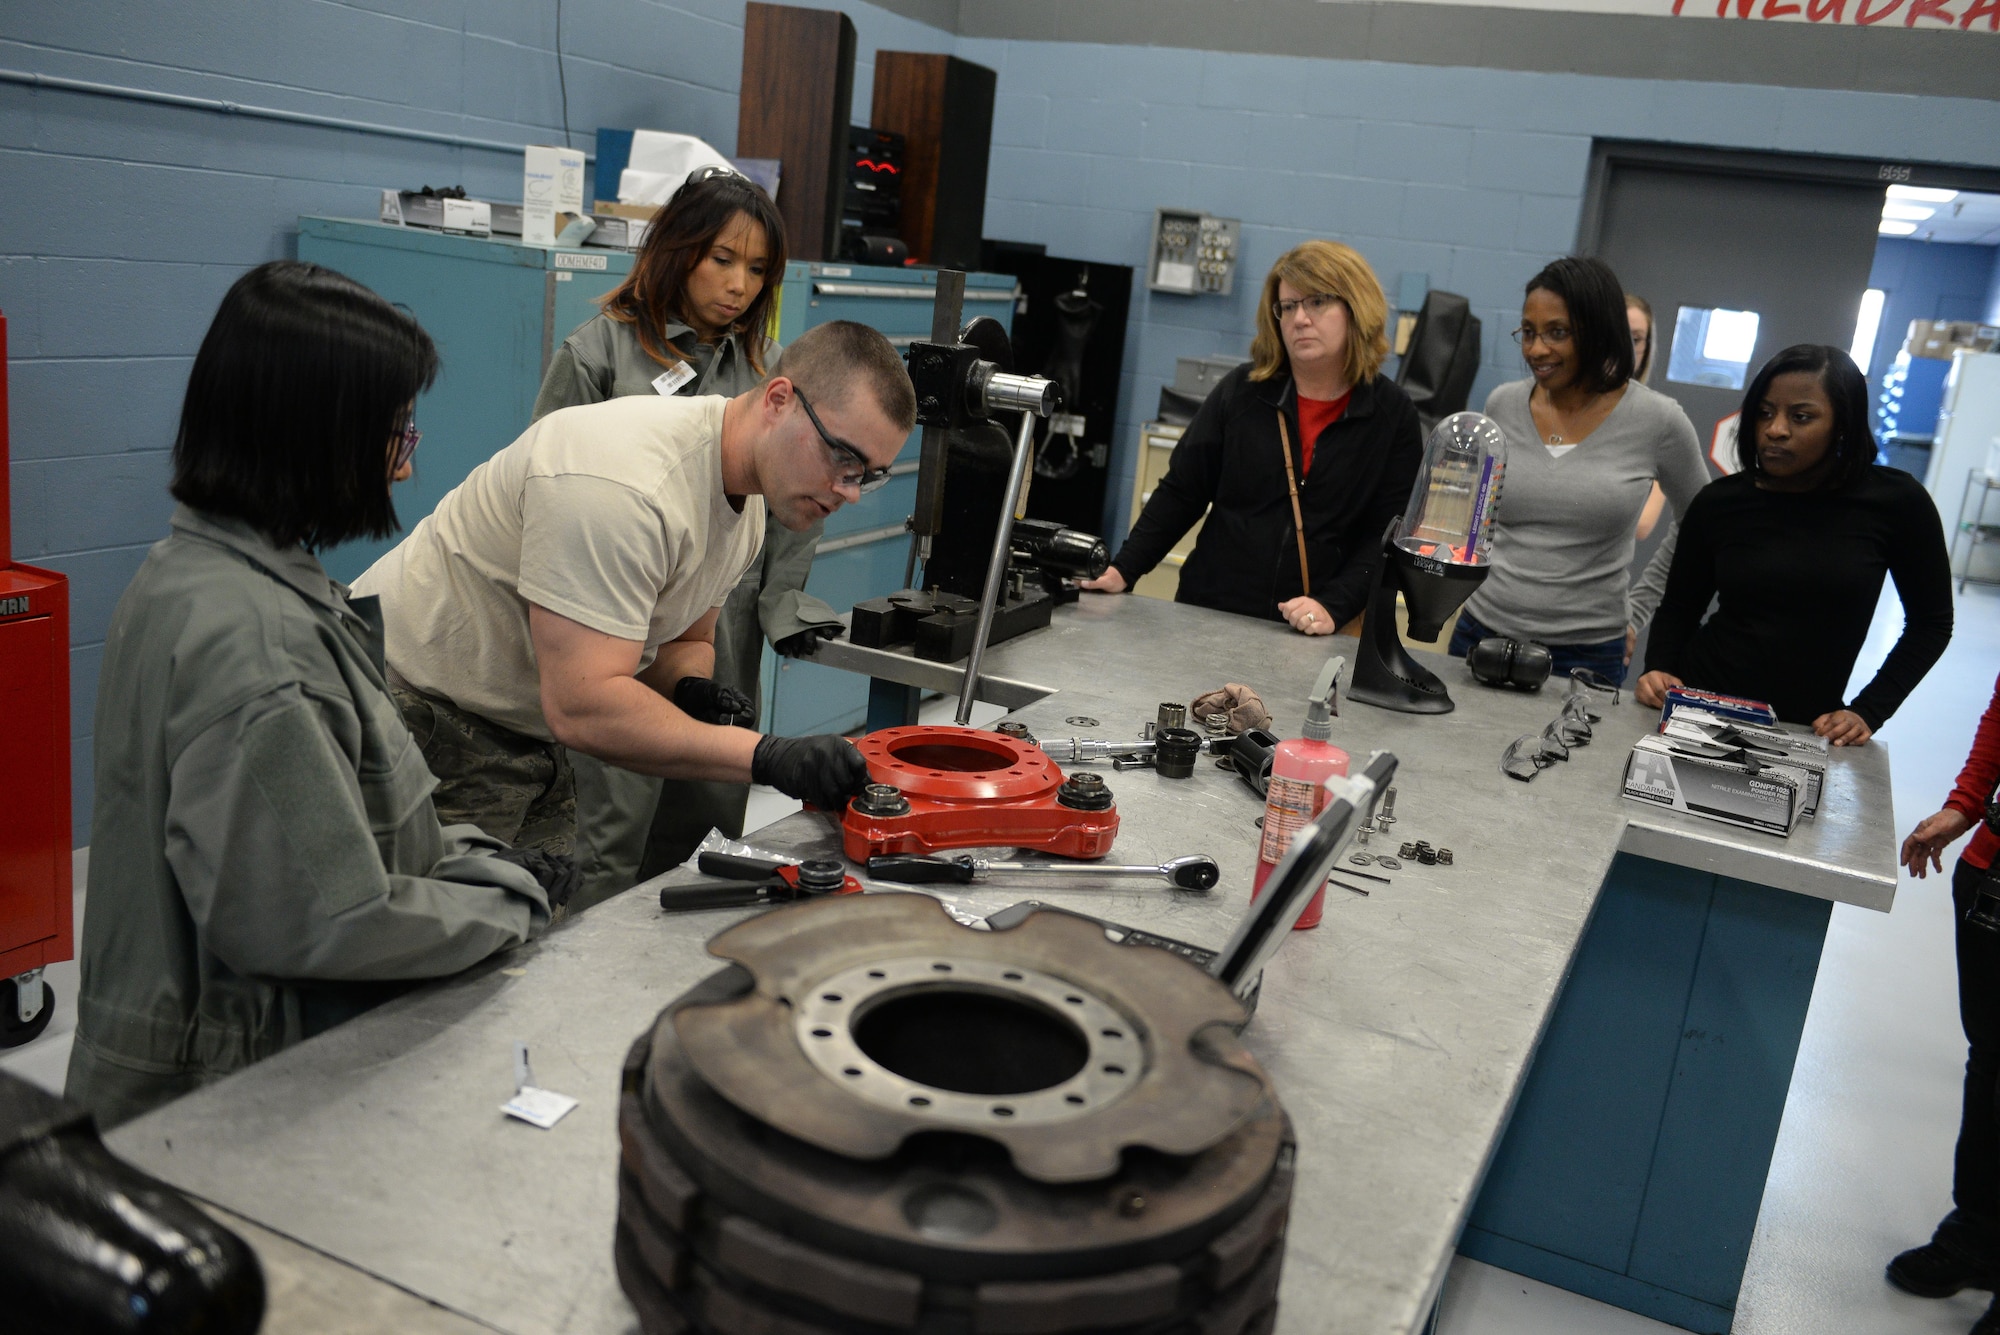 Airman 1st Class Kameron Hamilton, a 55th Maintenance Squadron hydraulics system journeyman, shows 55th MXS spouses how to work on a RC-135 break assembly part in the Bennie L. Davis Maintenance Facility at Offutt Air Force Base, Neb., Feb. 17, 2017. The tour was designed to show spouses what their significant others do to support the Air Force mission.(U.S. Air Force photo by Zachary Hada)